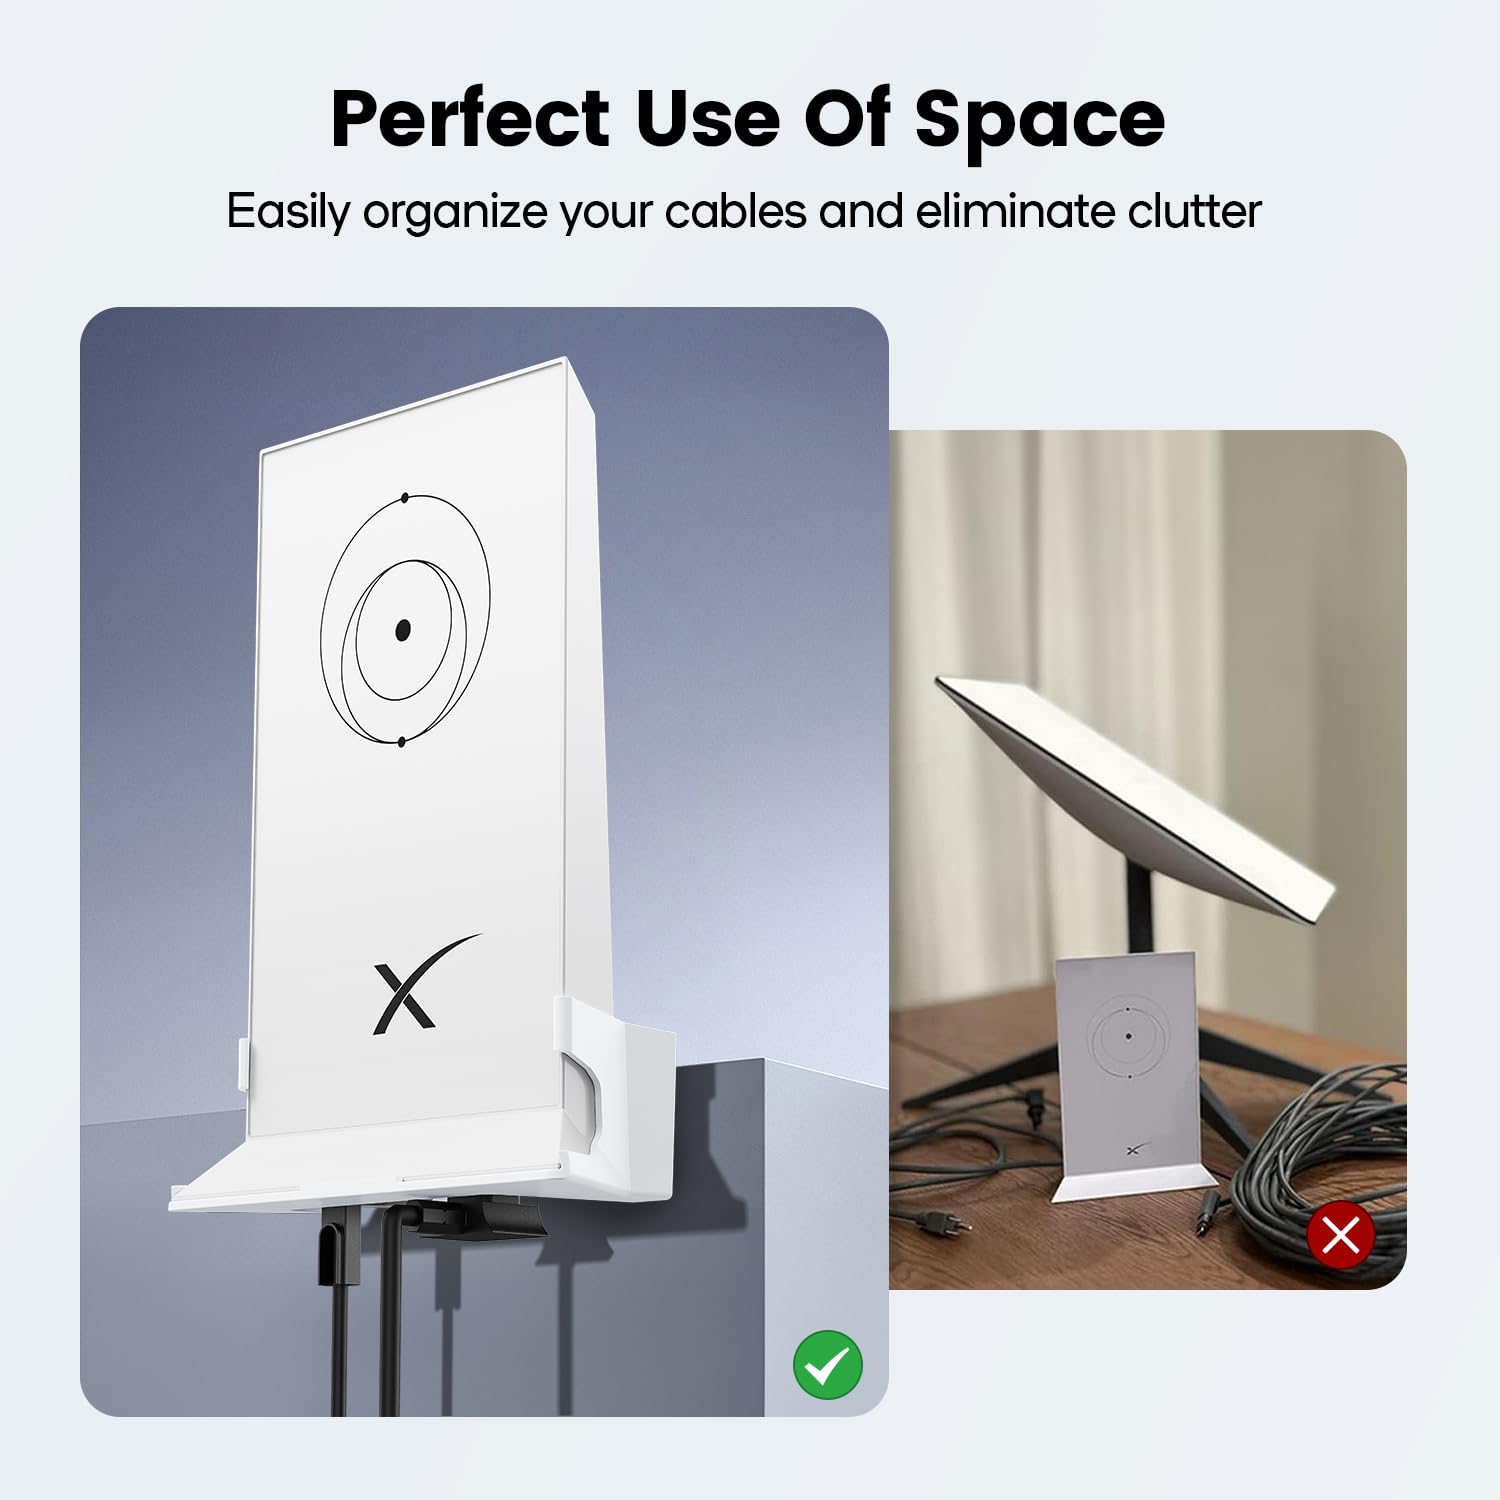 Starlink Wall Mount, New Upgraded Star Link Internet Kit Satellite Brackets ABS Router Holder Protection for StarLink Mesh Router V2 Mesh Router White